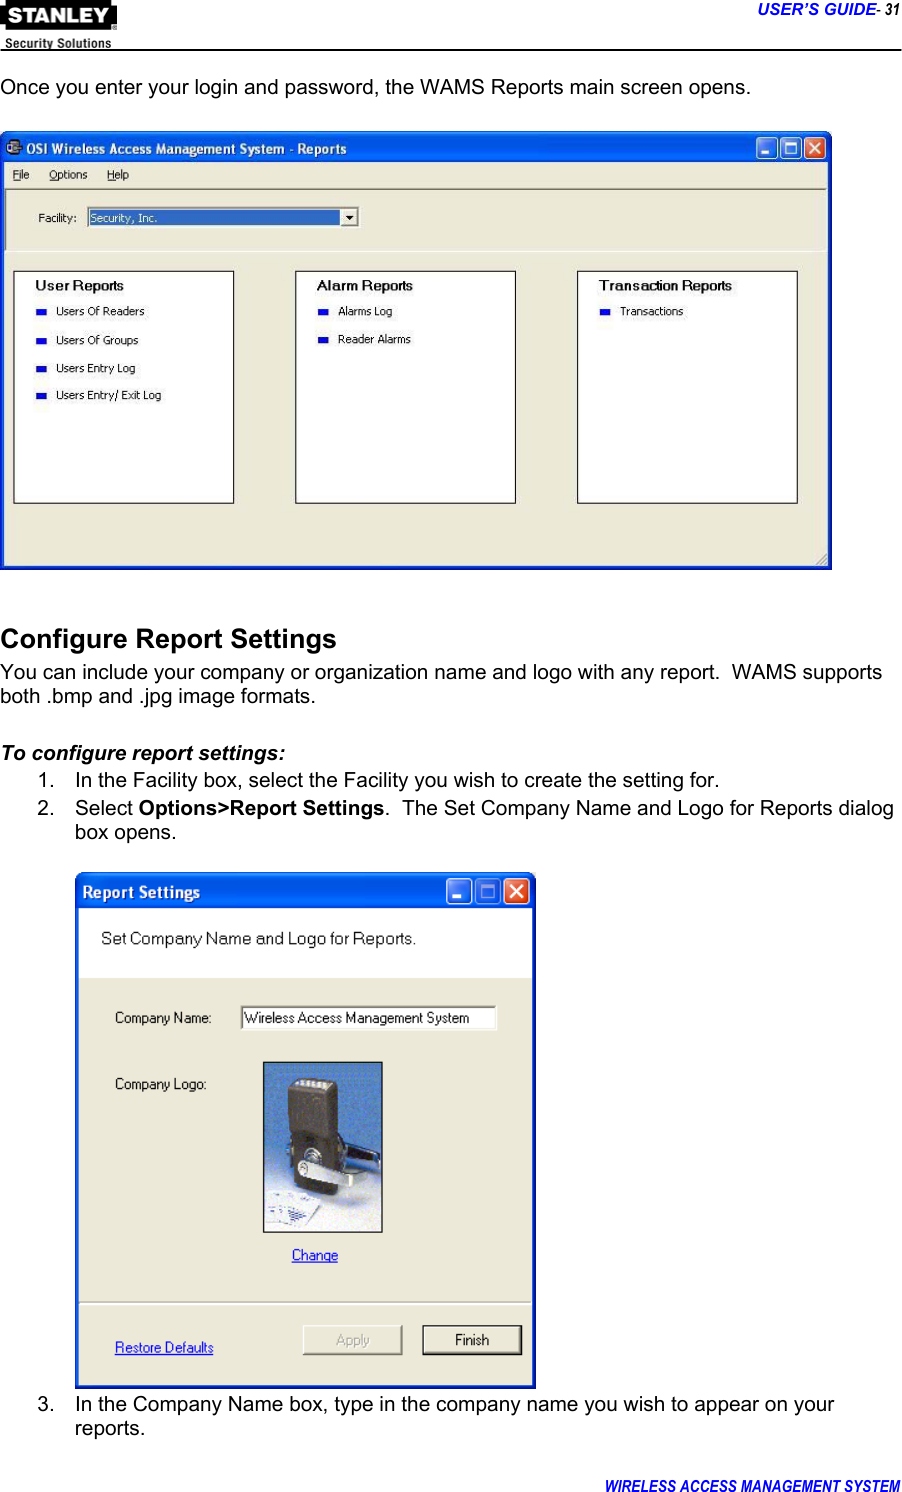      USER’S GUIDE- 31 WIRELESS ACCESS MANAGEMENT SYSTEM  Once you enter your login and password, the WAMS Reports main screen opens.    Configure Report Settings You can include your company or organization name and logo with any report.  WAMS supports both .bmp and .jpg image formats.  To configure report settings: 1.  In the Facility box, select the Facility you wish to create the setting for. 2. Select Options&gt;Report Settings.  The Set Company Name and Logo for Reports dialog box opens.   3.  In the Company Name box, type in the company name you wish to appear on your reports. 